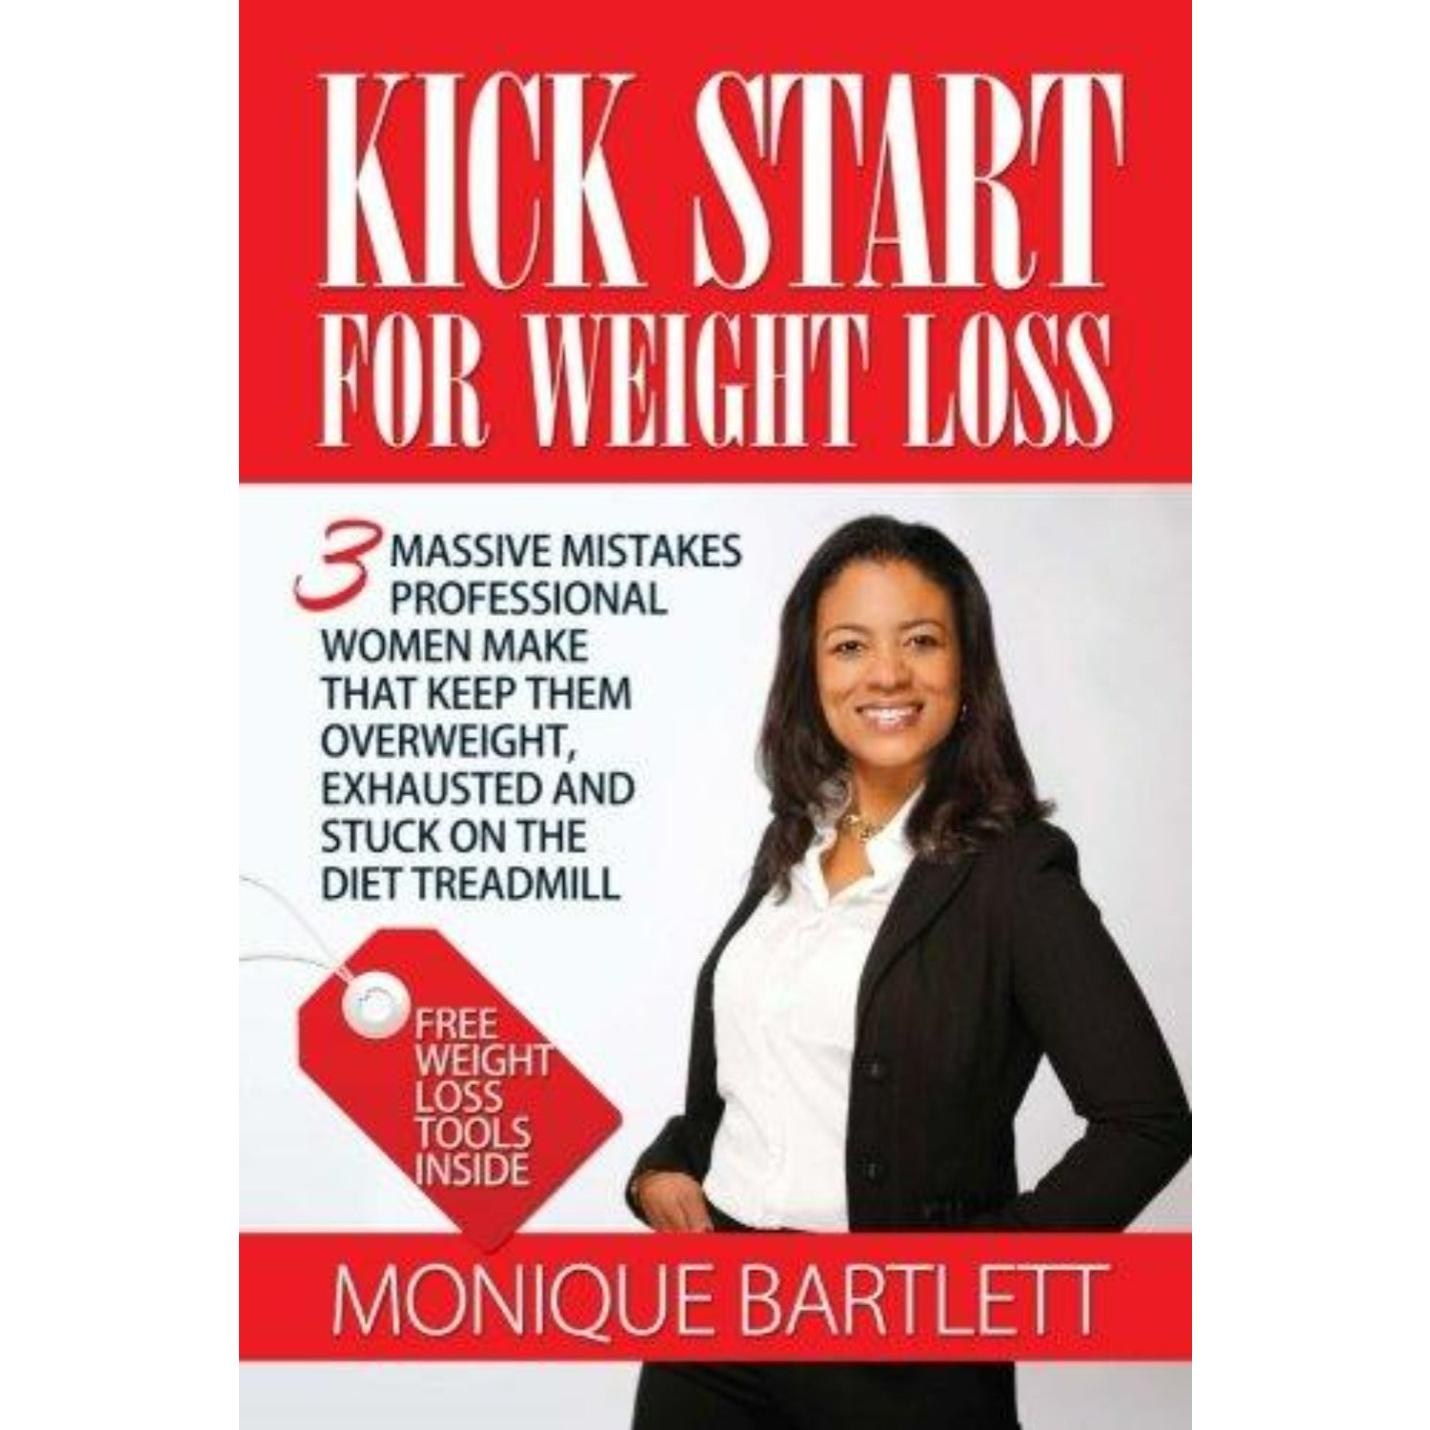 Kick Start For Weight Loss: 3 Massive Mistakes Professional Women Make That Keep Them Overweight, Exhausted and Stuck On The Diet Treadmill - happygetfit.com